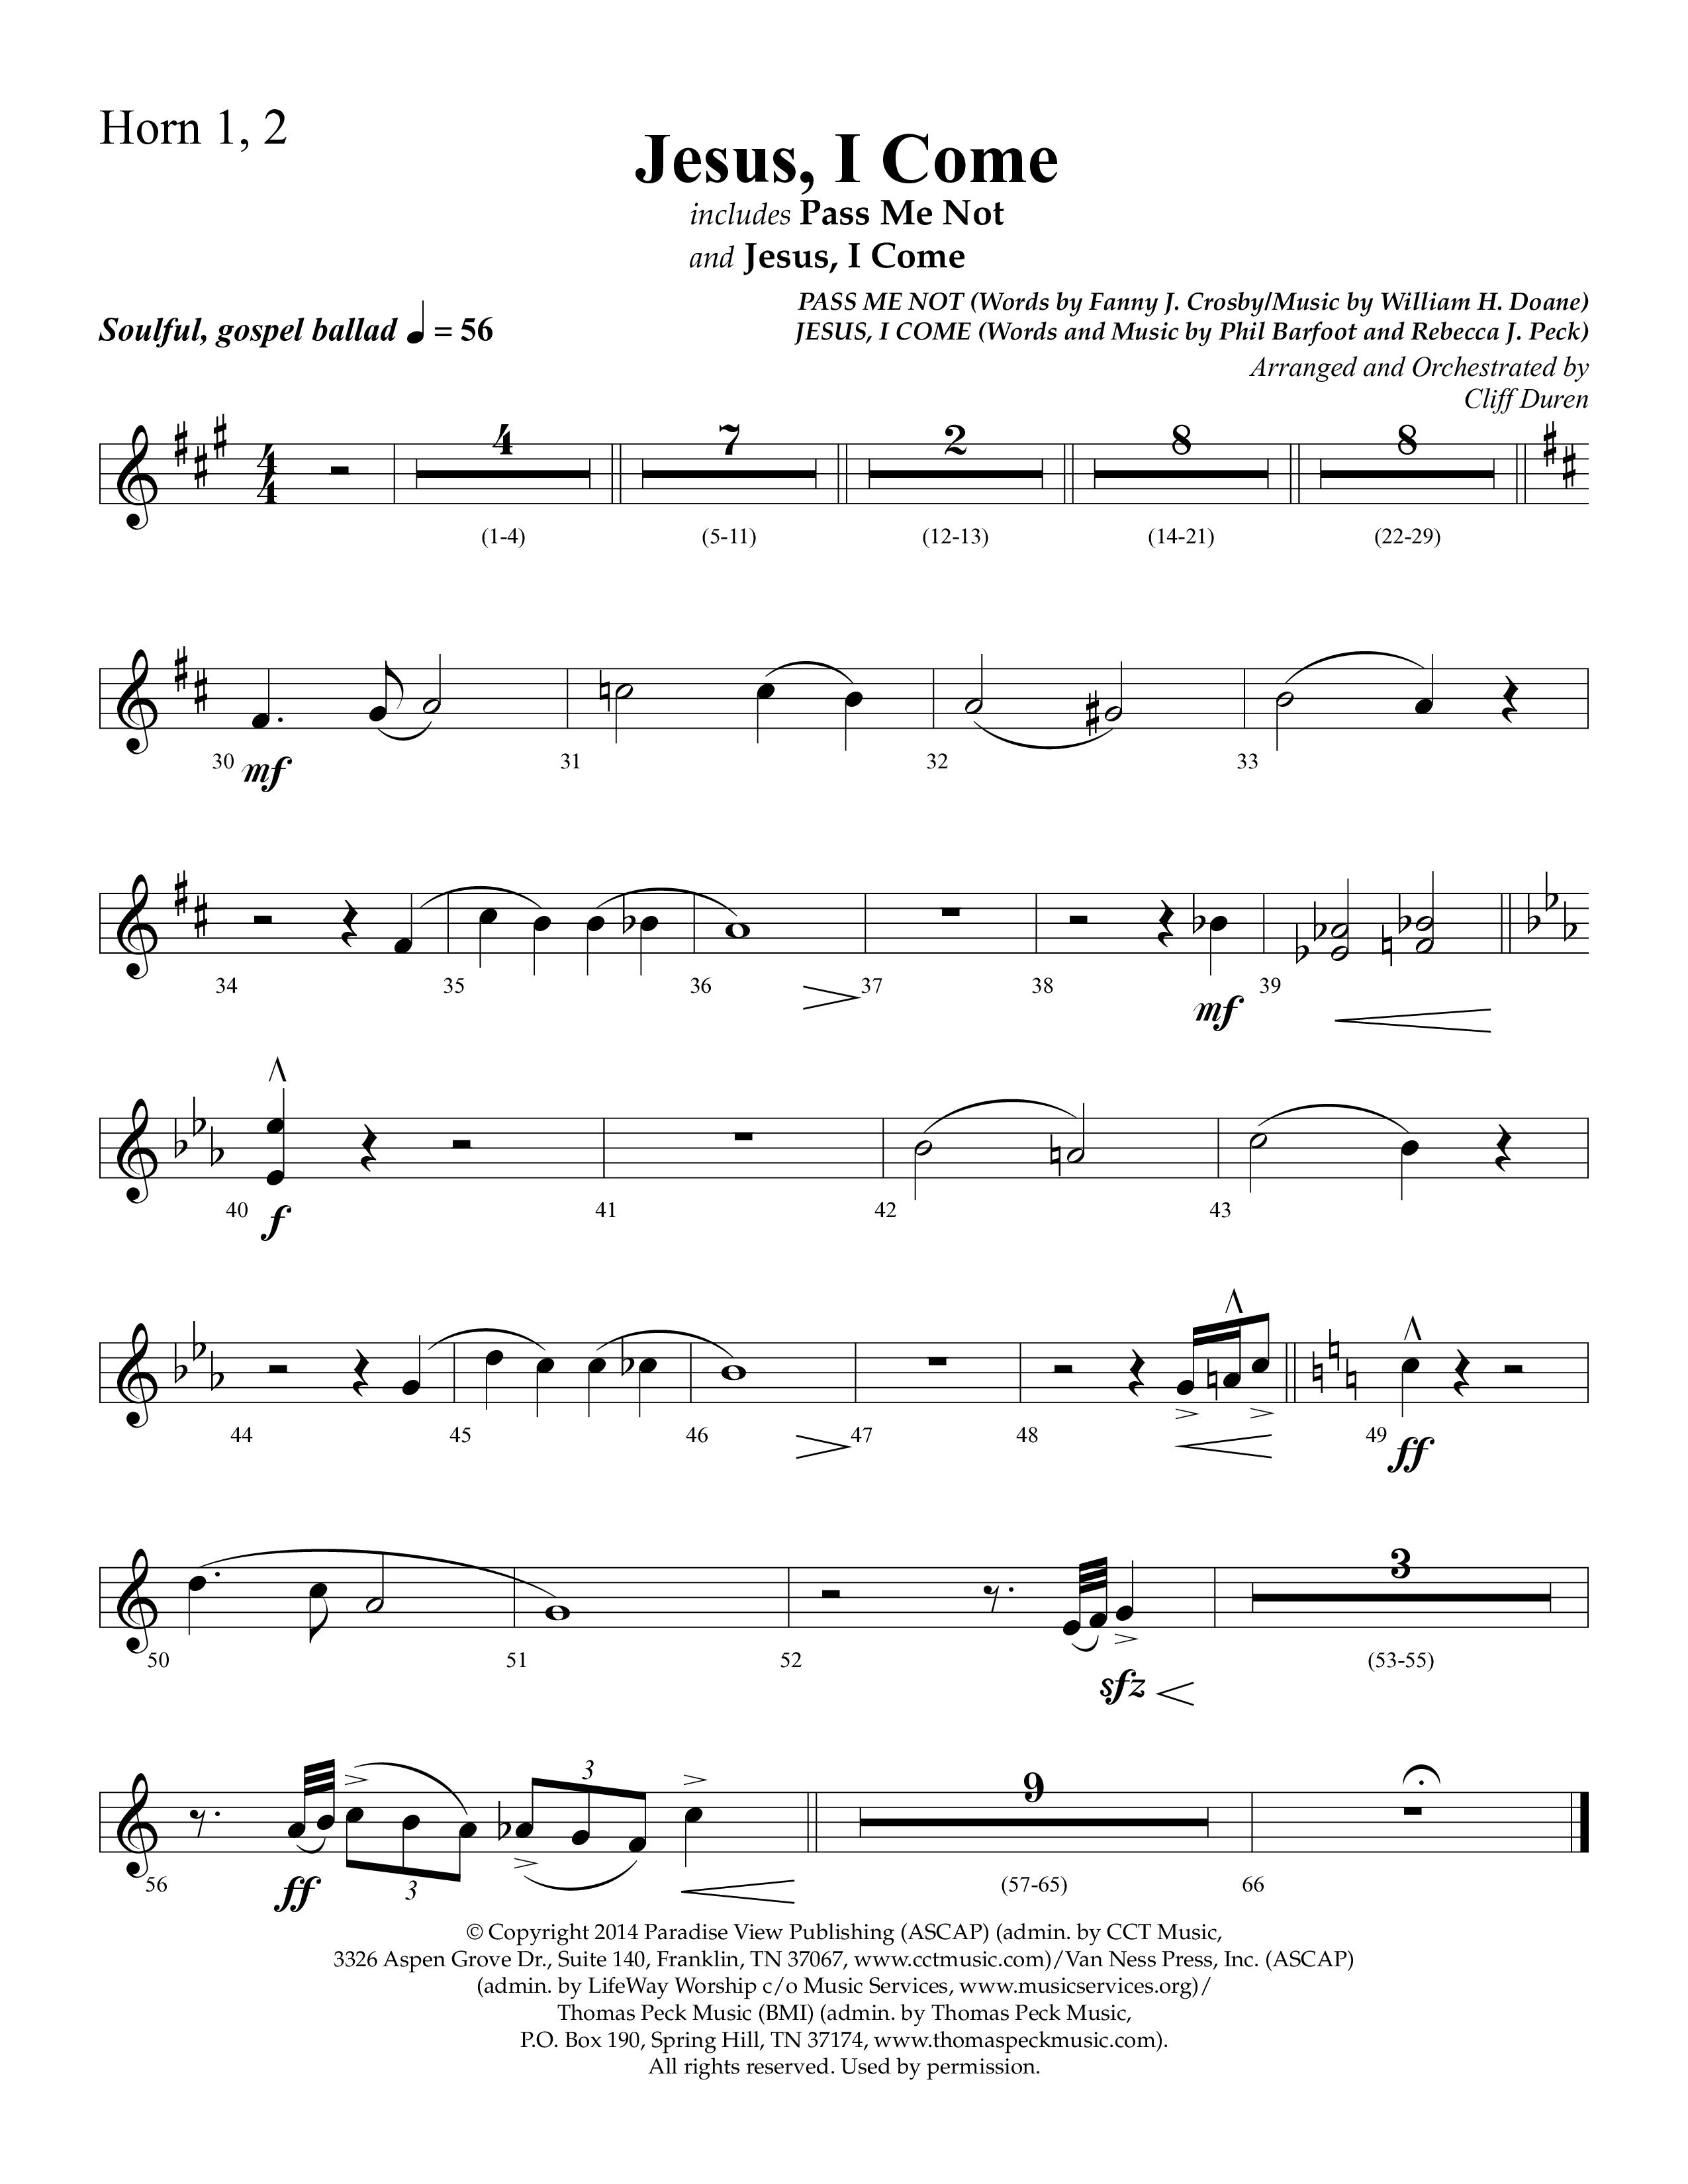 Jesus I Come (with Pass Me Not) (Choral Anthem SATB) French Horn 1/2 (Lifeway Choral / Arr. Cliff Duren)